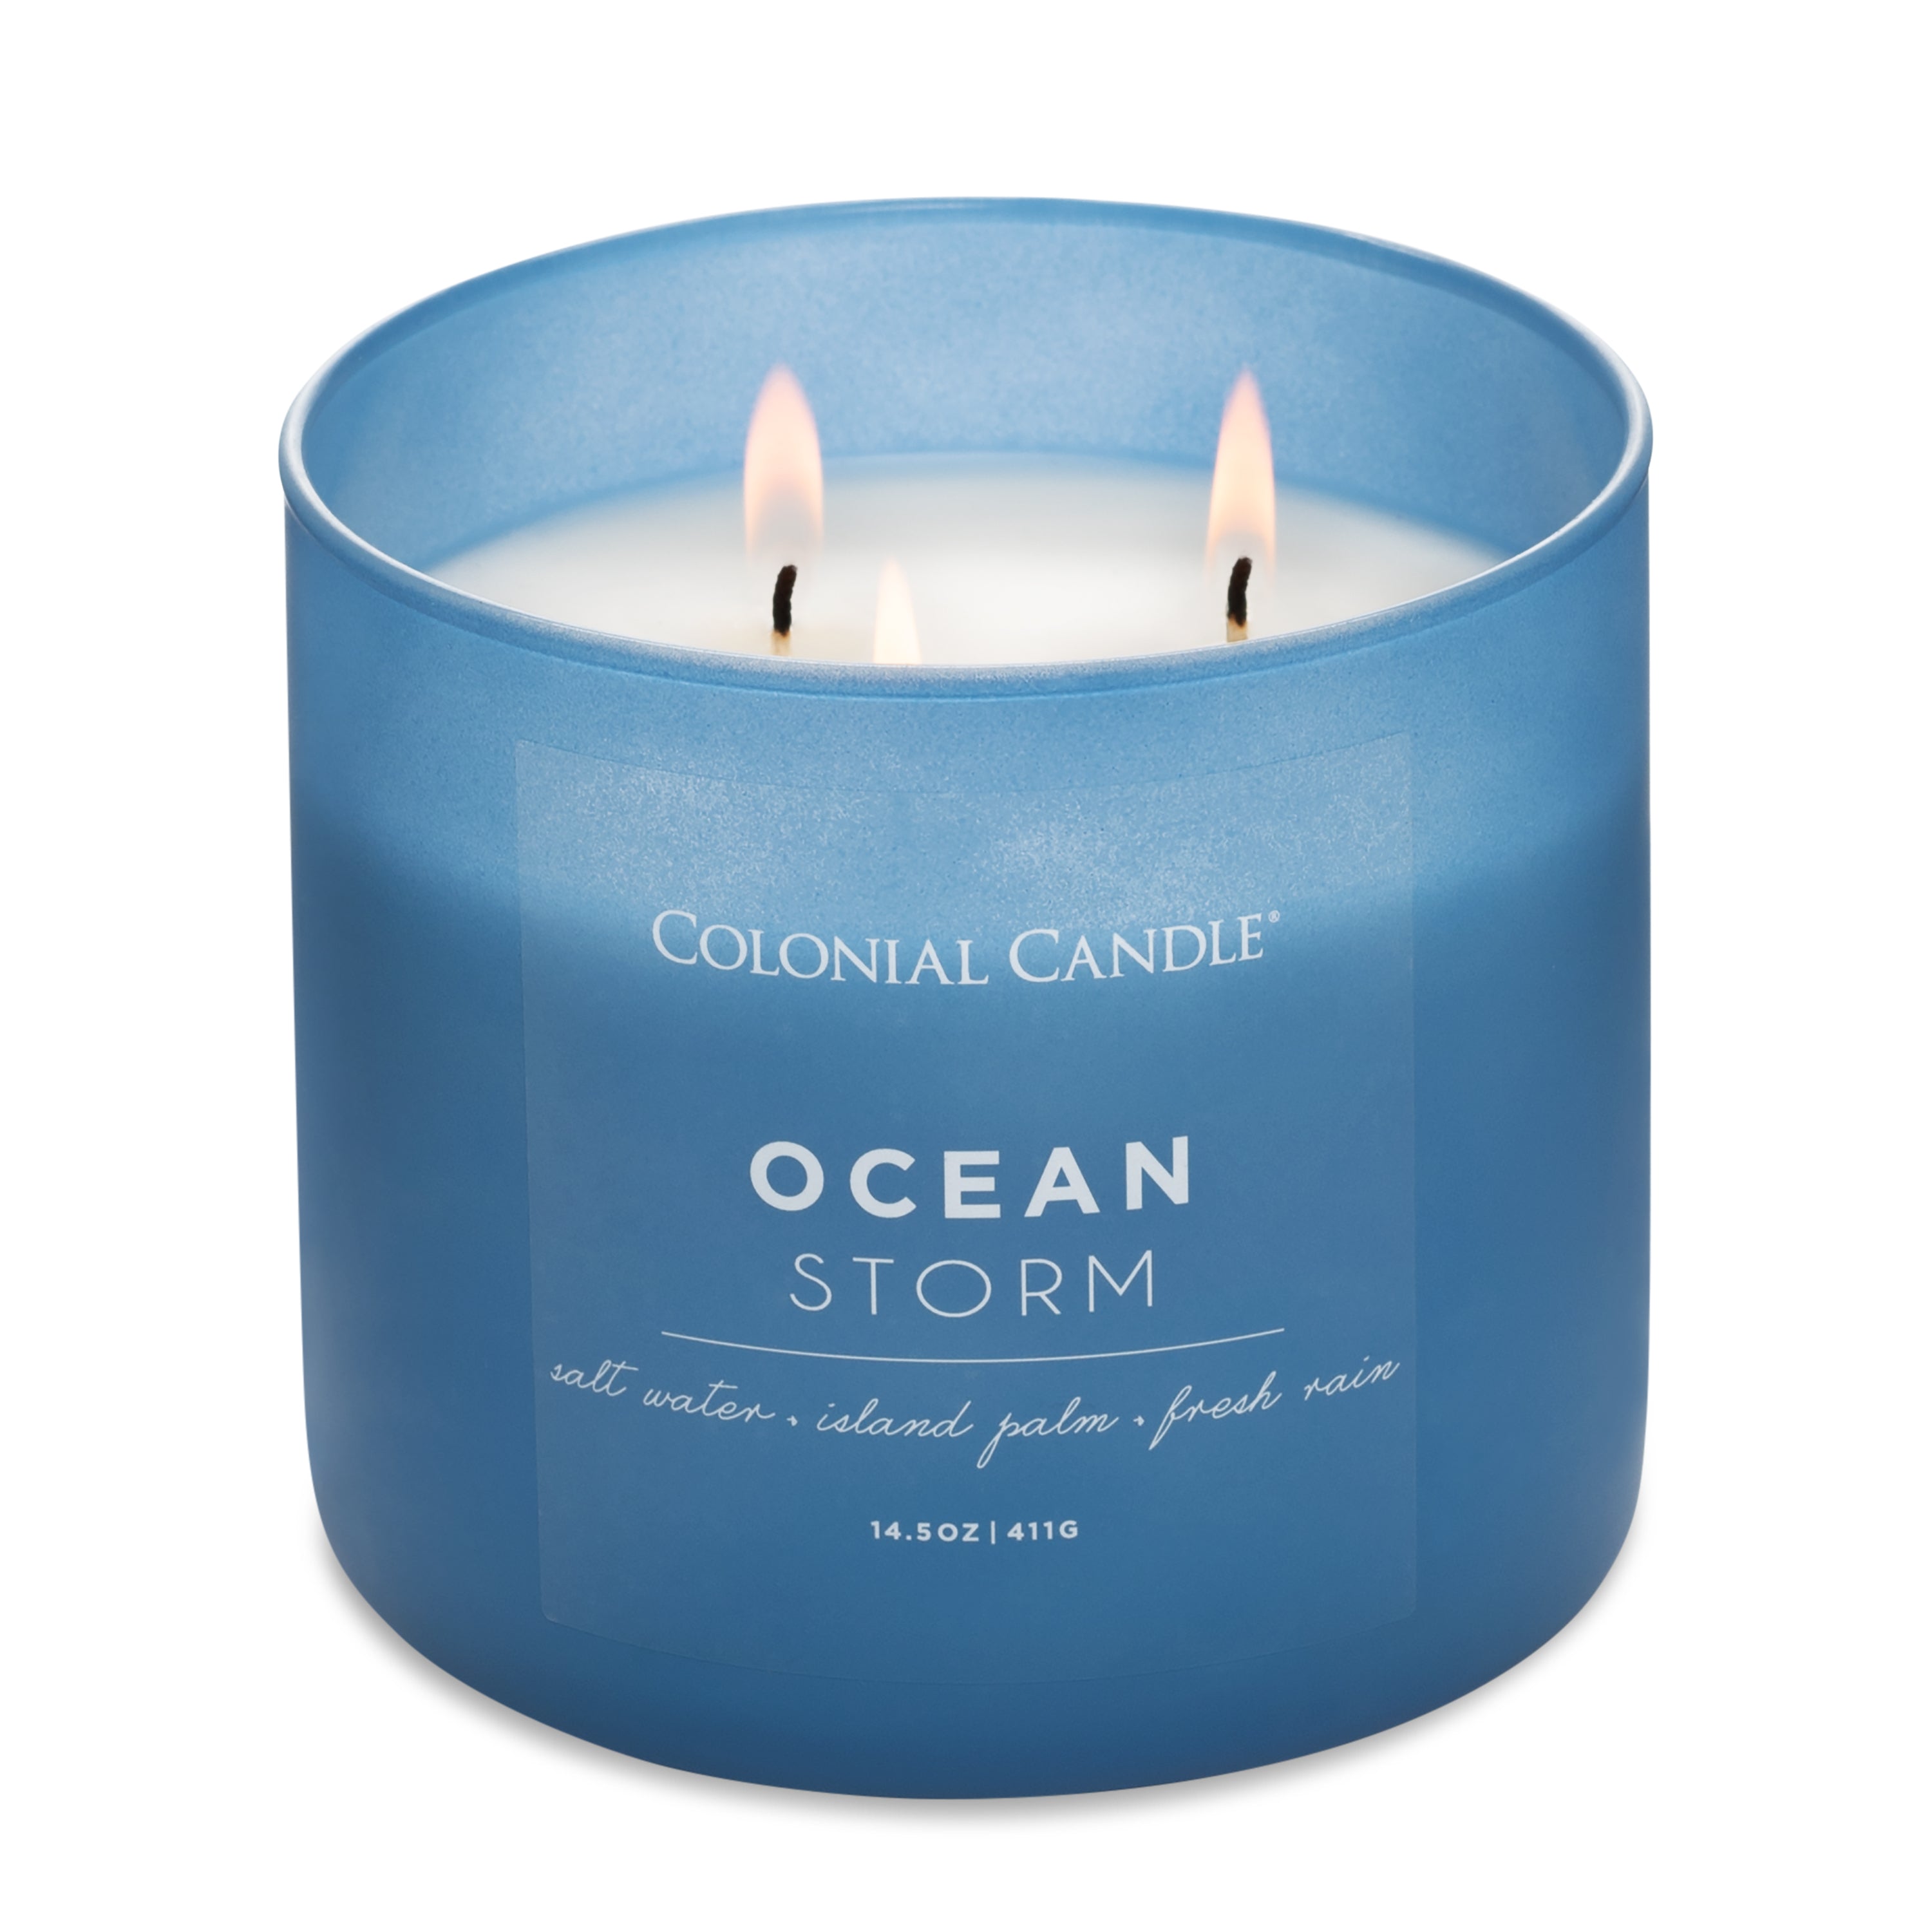 Colonial Candle Candle, Ocean Storm - 1 candle, 14.5 oz